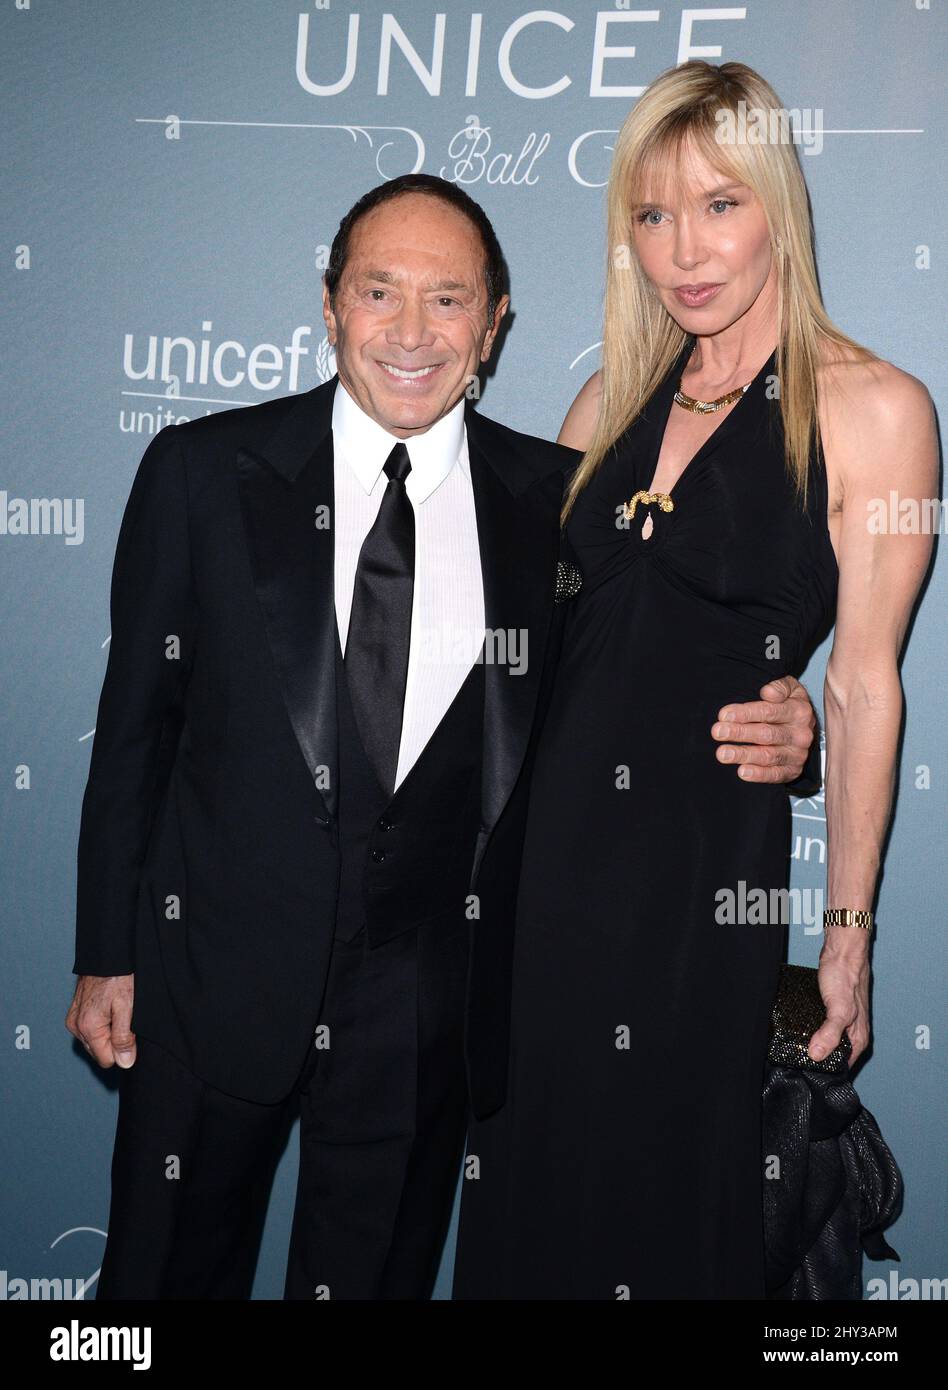 Paul Anka attending the 2014 UNICEF Ball in Los Angeles Stock Photo